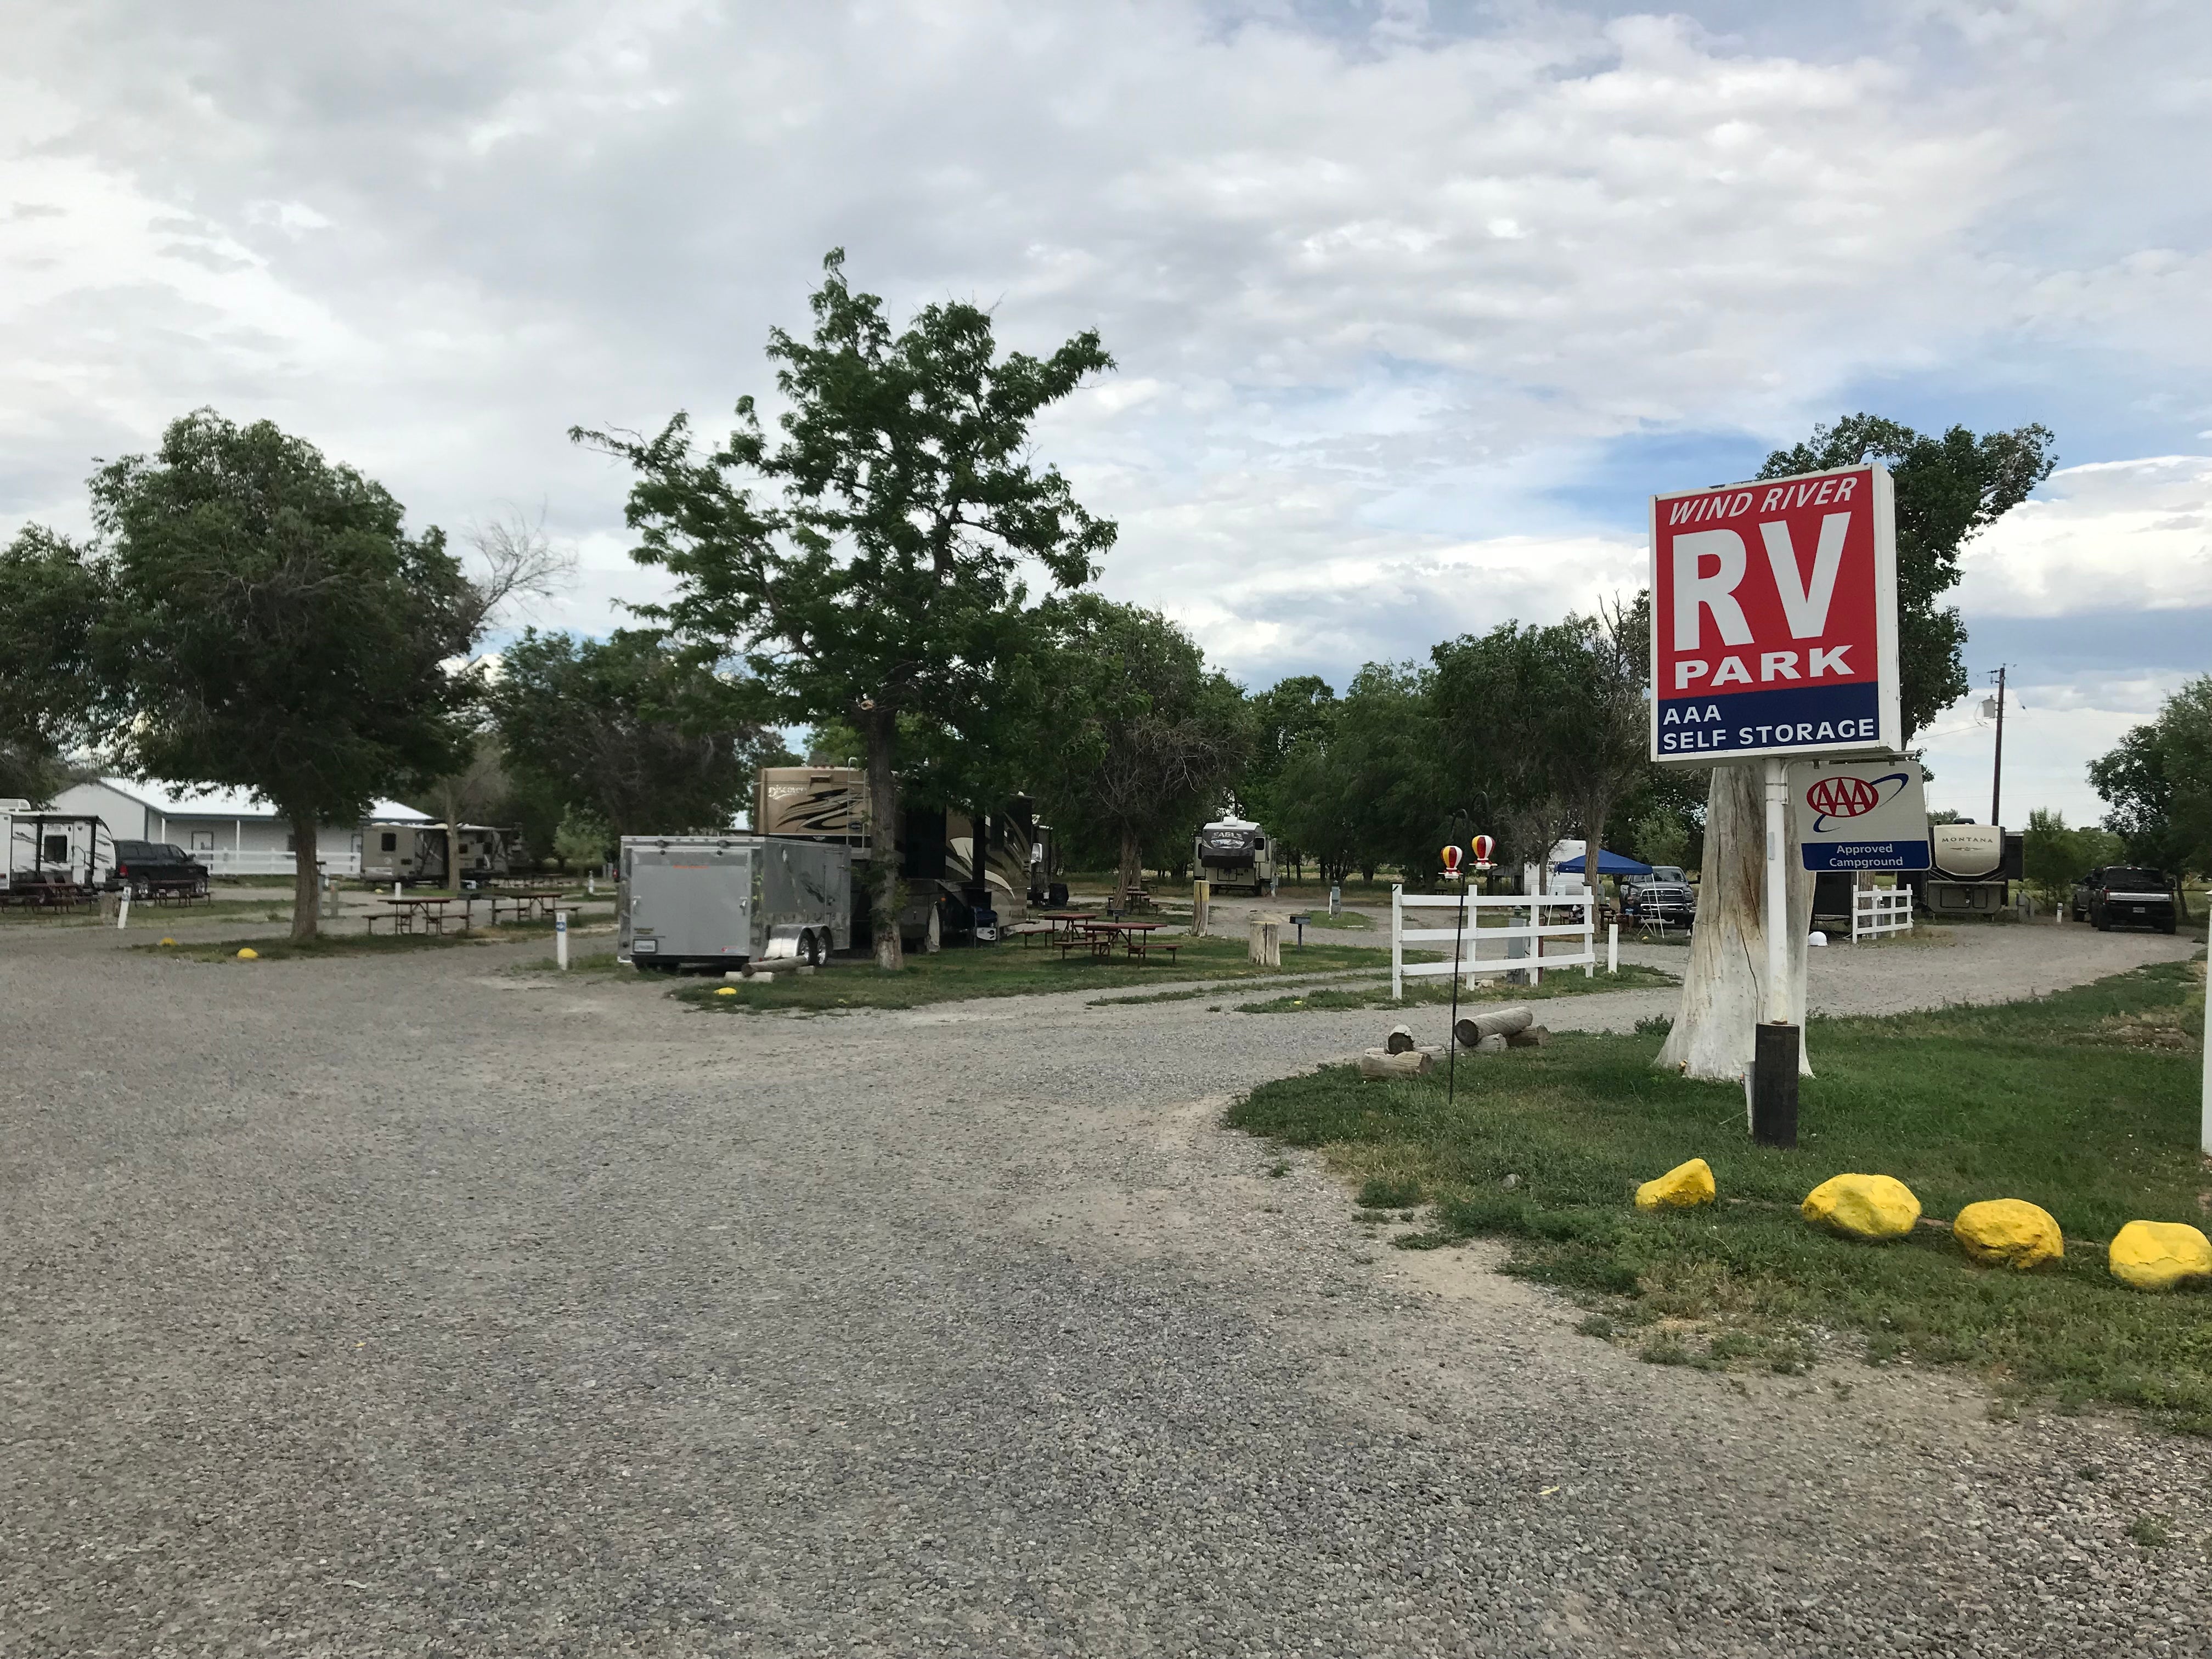 Camper submitted image from Wind River RV Park - 4